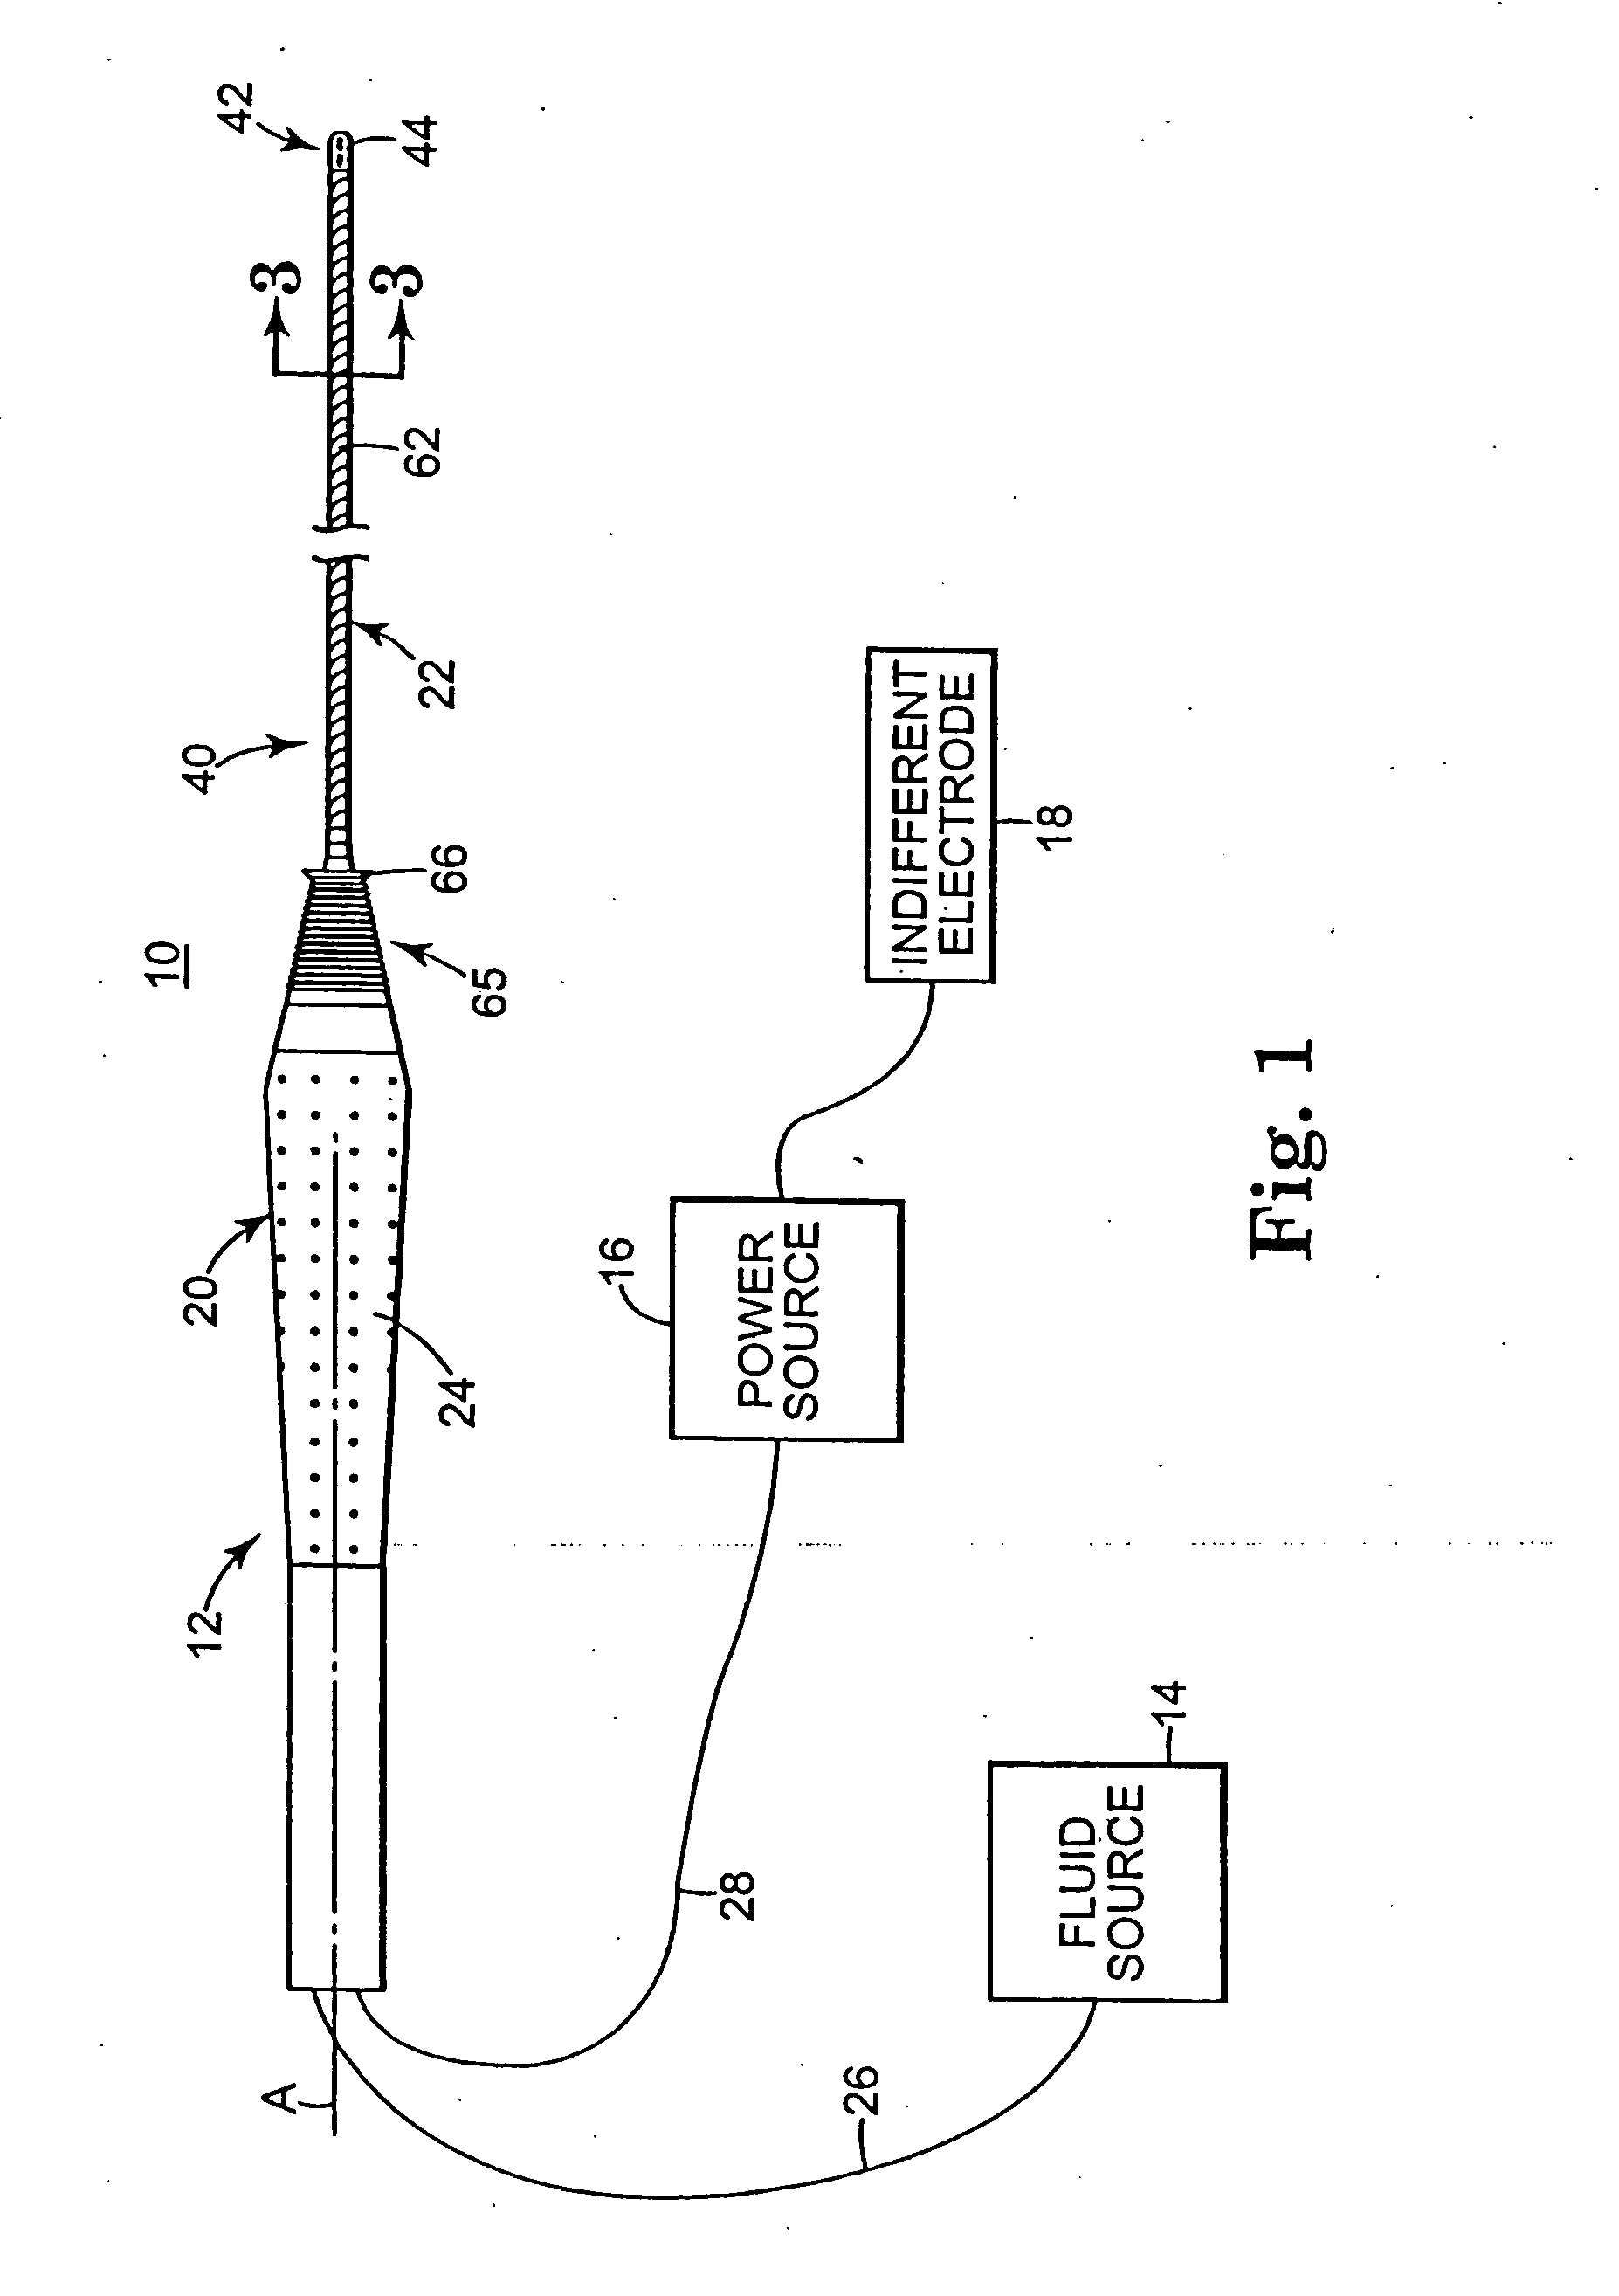 Cardiac mapping instrument with shapeable electrode